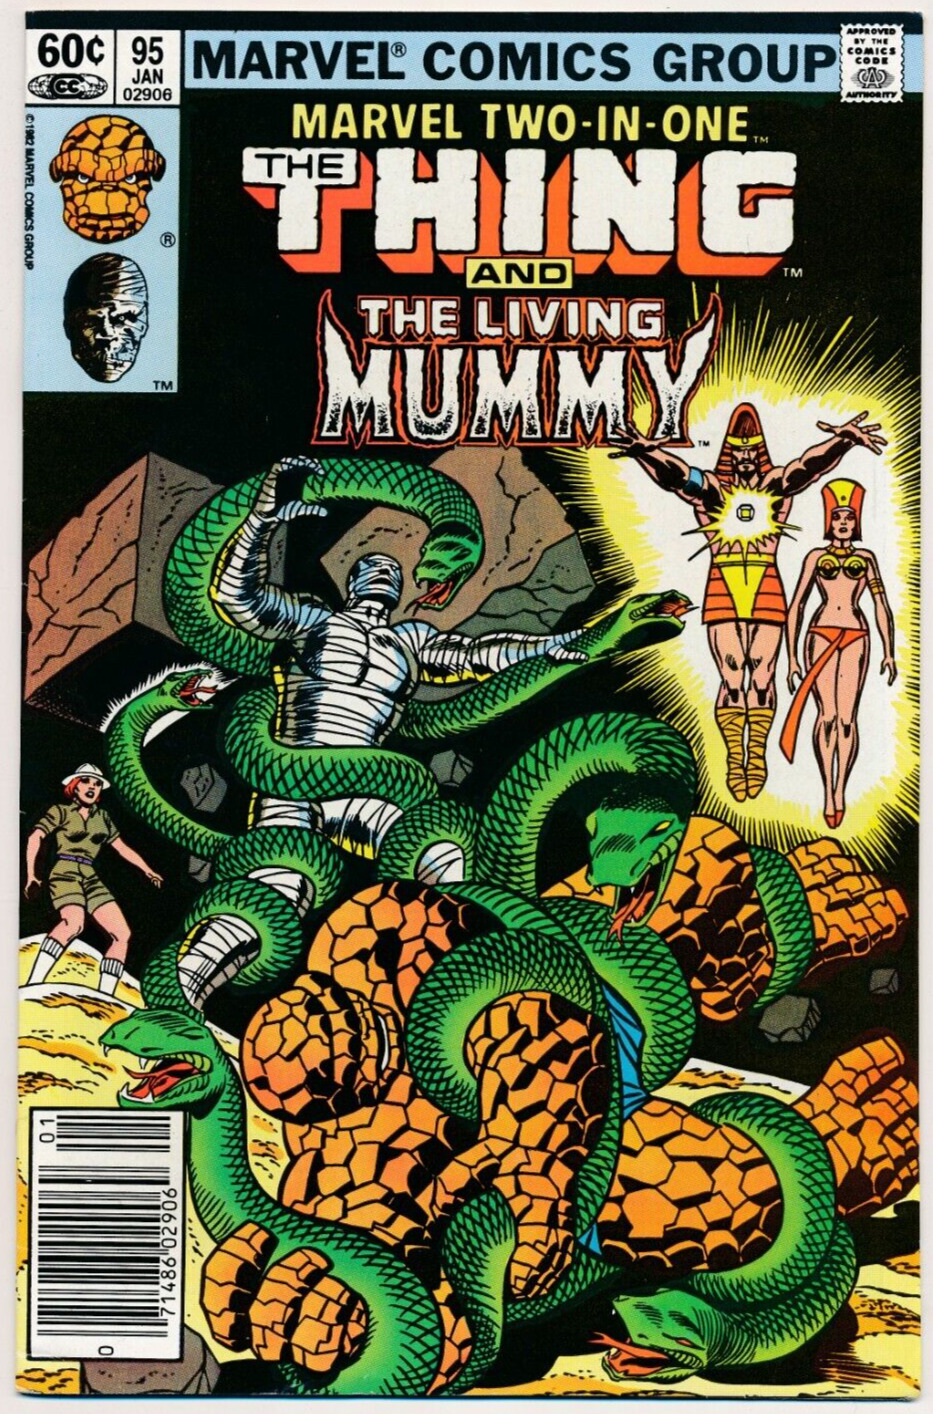 Marvel Two-In-One (Marvel, 1974 series) #95 VF  Thing and The Living Mummy